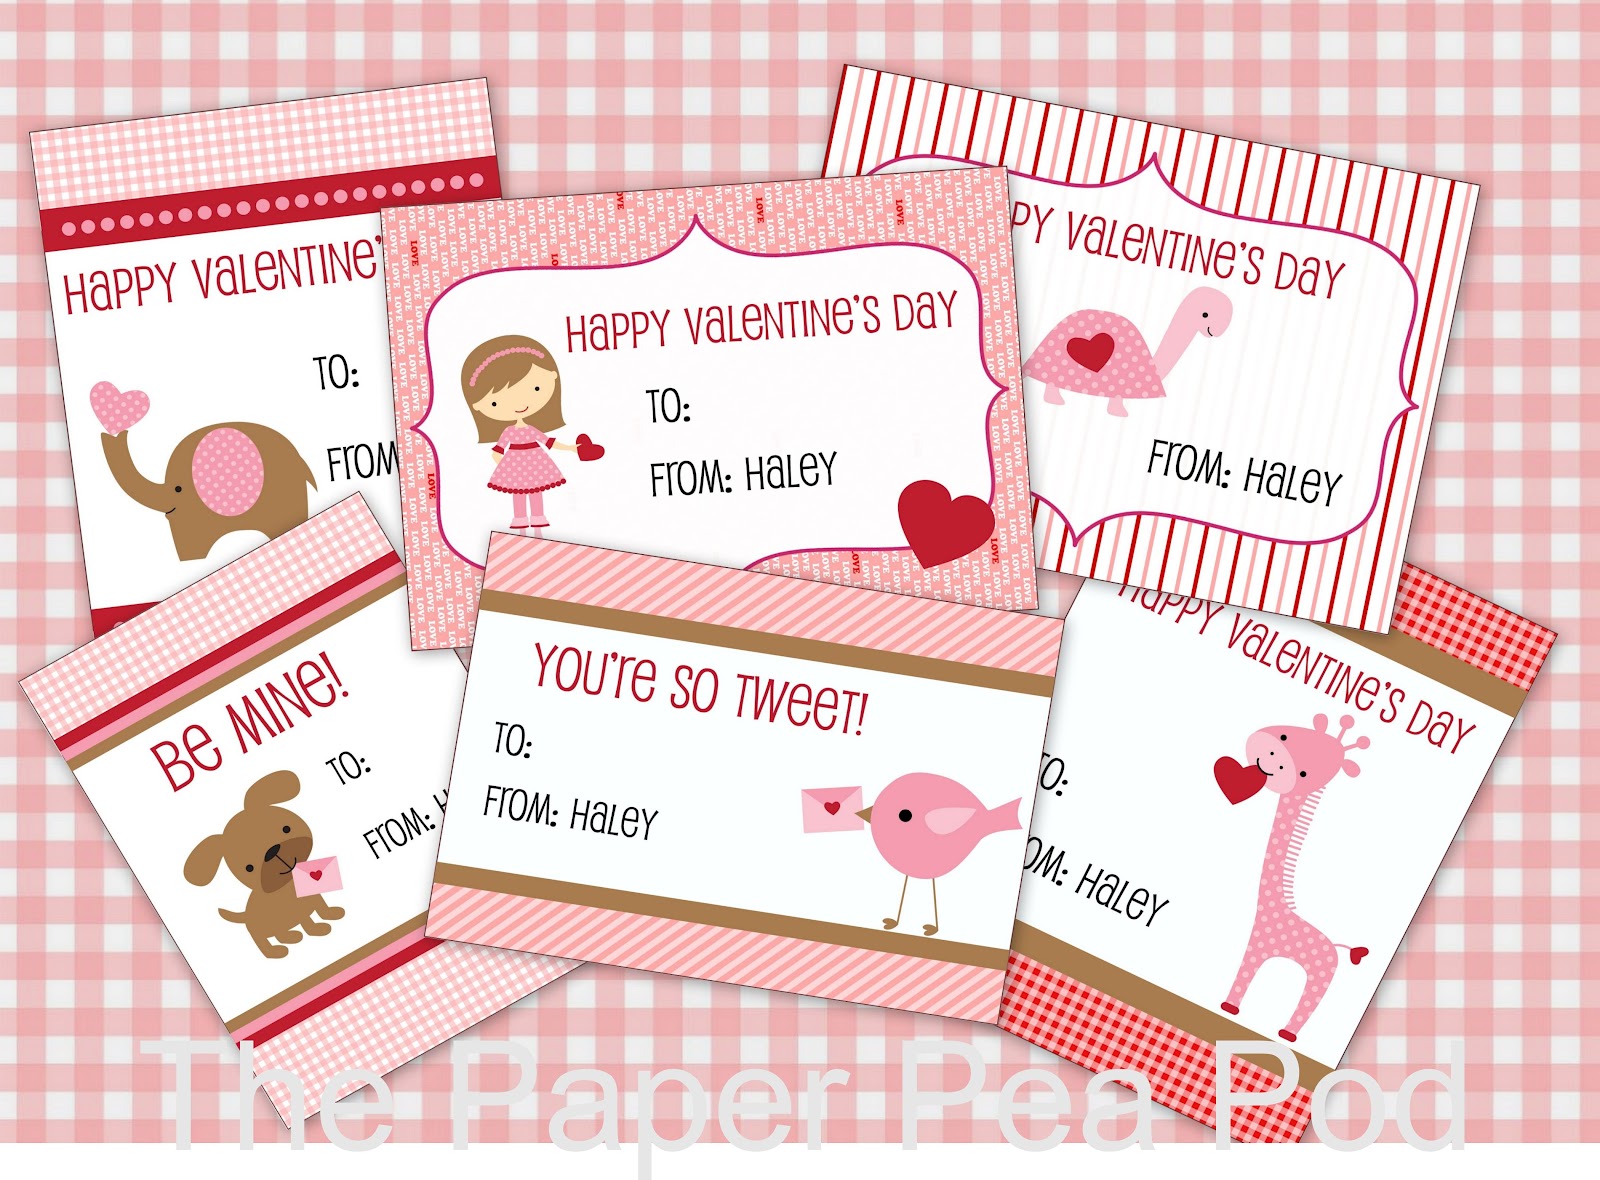 Valentines Day Wishes Cards Hd Wallpapers Of Cards Valentines Day